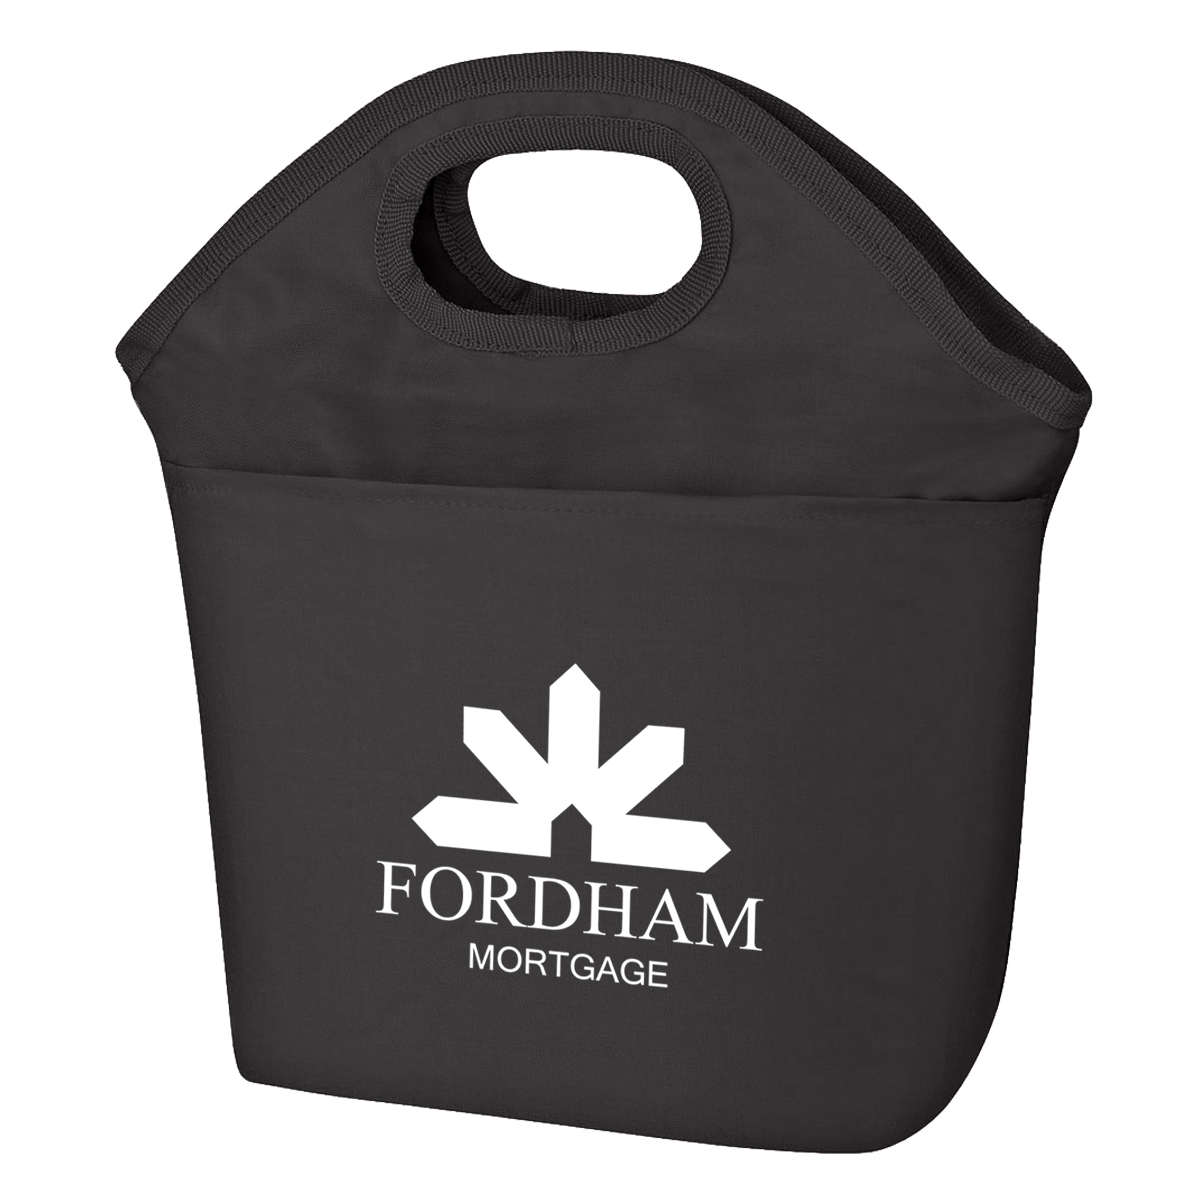 DISCOUNT PROMOS Custom Insulated Cooler Lunch Bag Set of 100, Personalized  Bulk Pack - Perfect for W…See more DISCOUNT PROMOS Custom Insulated Cooler